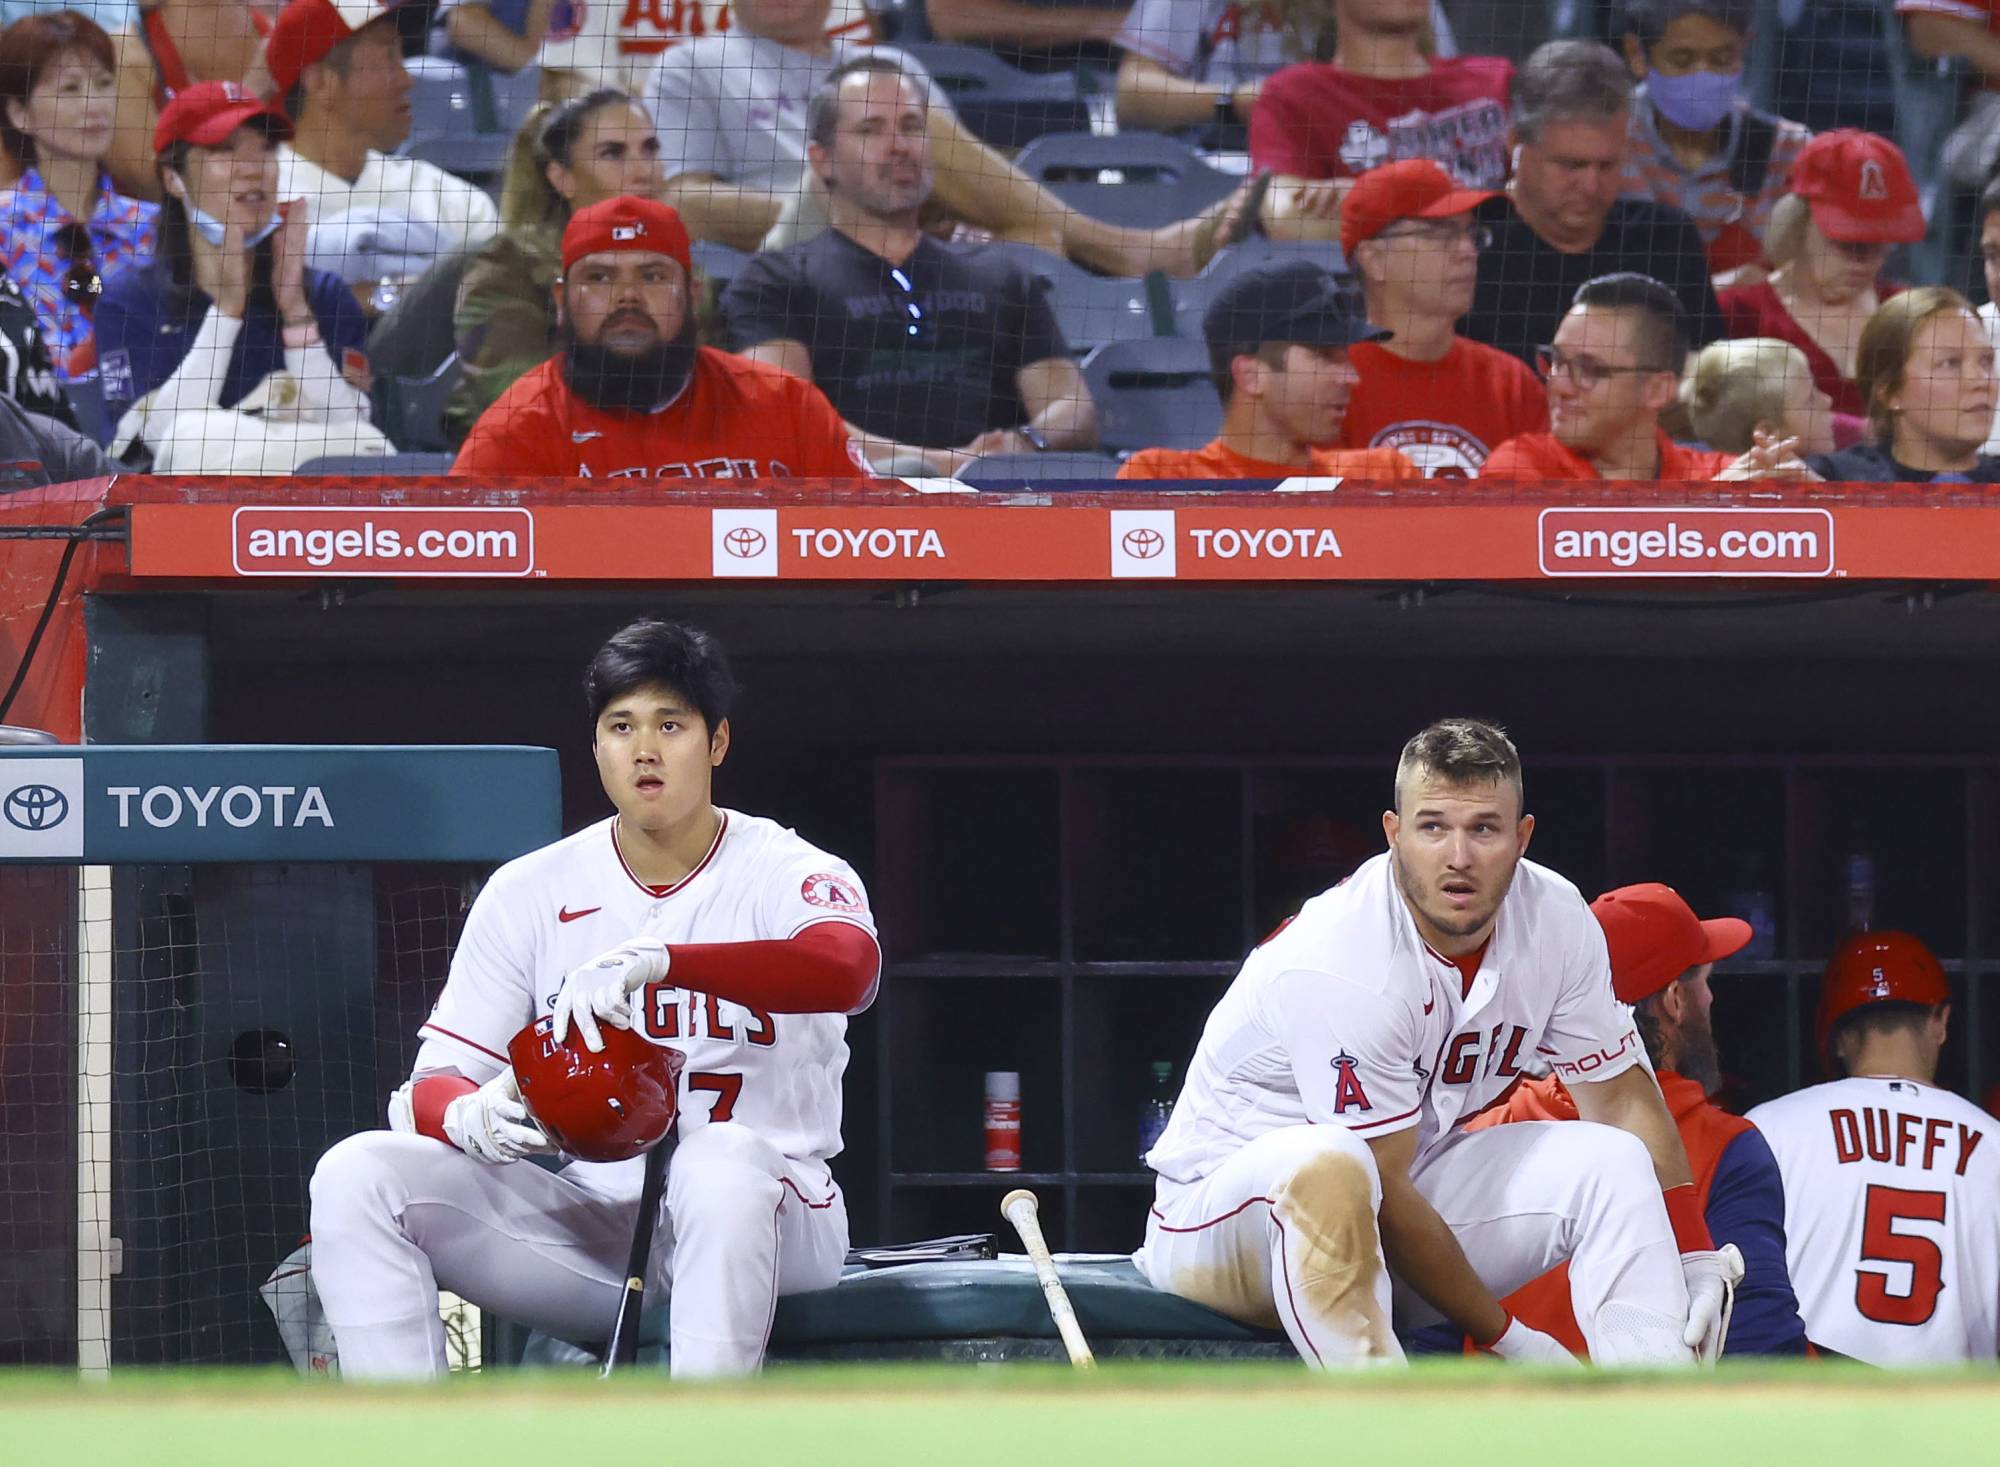 It's time to rescue Mike Trout and Shohei Ohtani - The Japan Times